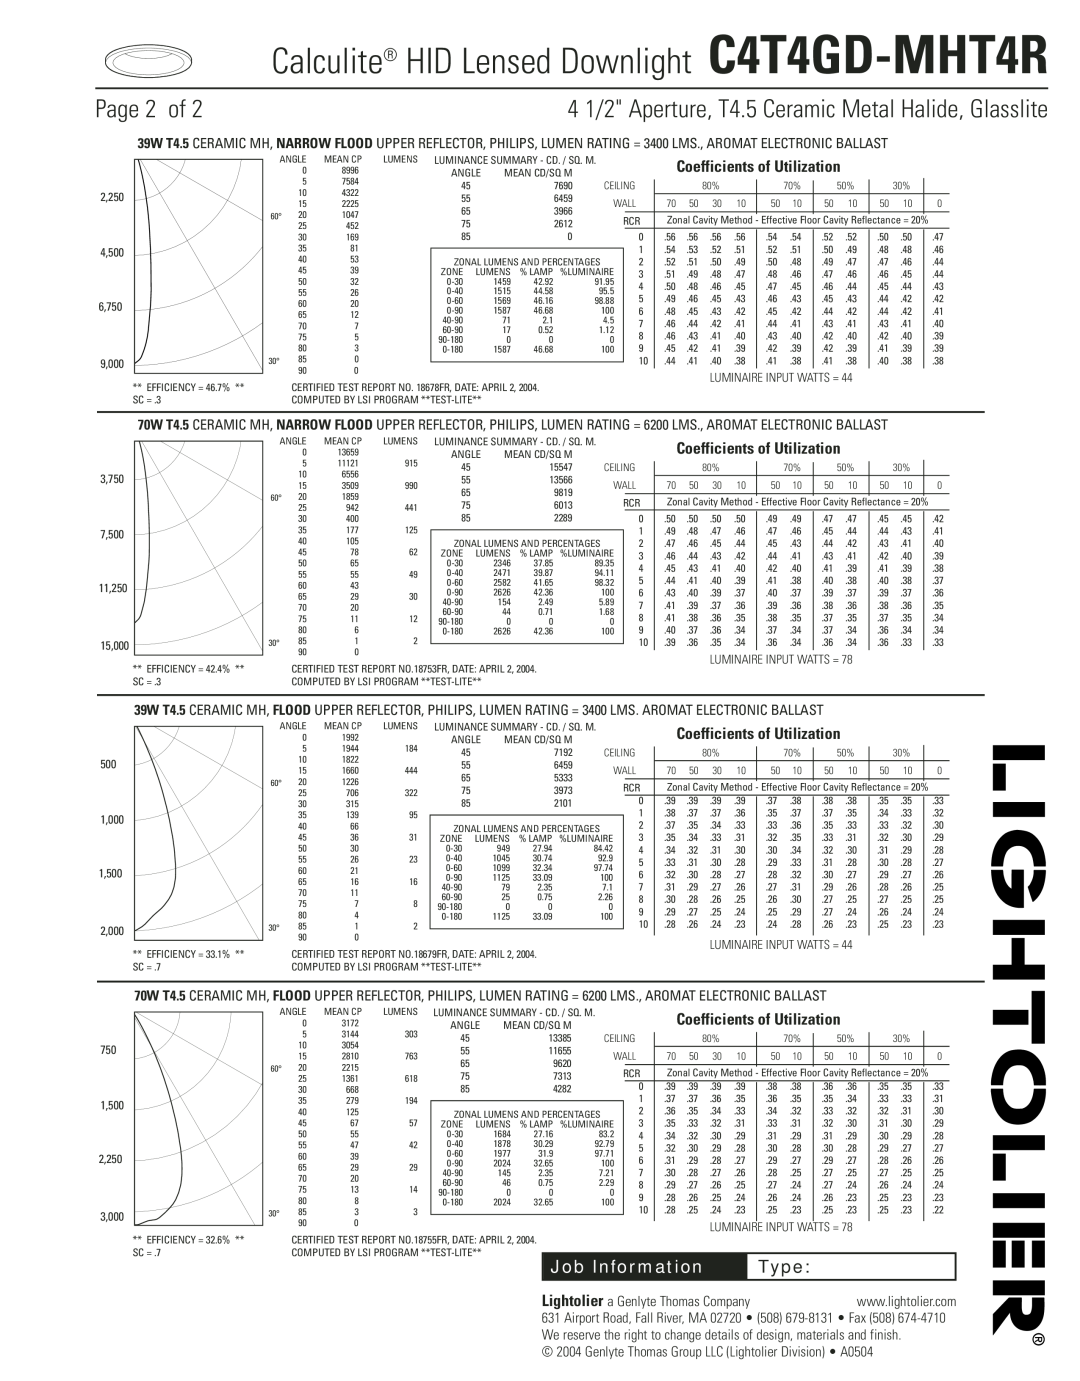 Lightolier Calculite HID Lensed Downlight C4T4GD-MHT4R, Page 2 of, Job Information, Type, Coefficients of Utilization 